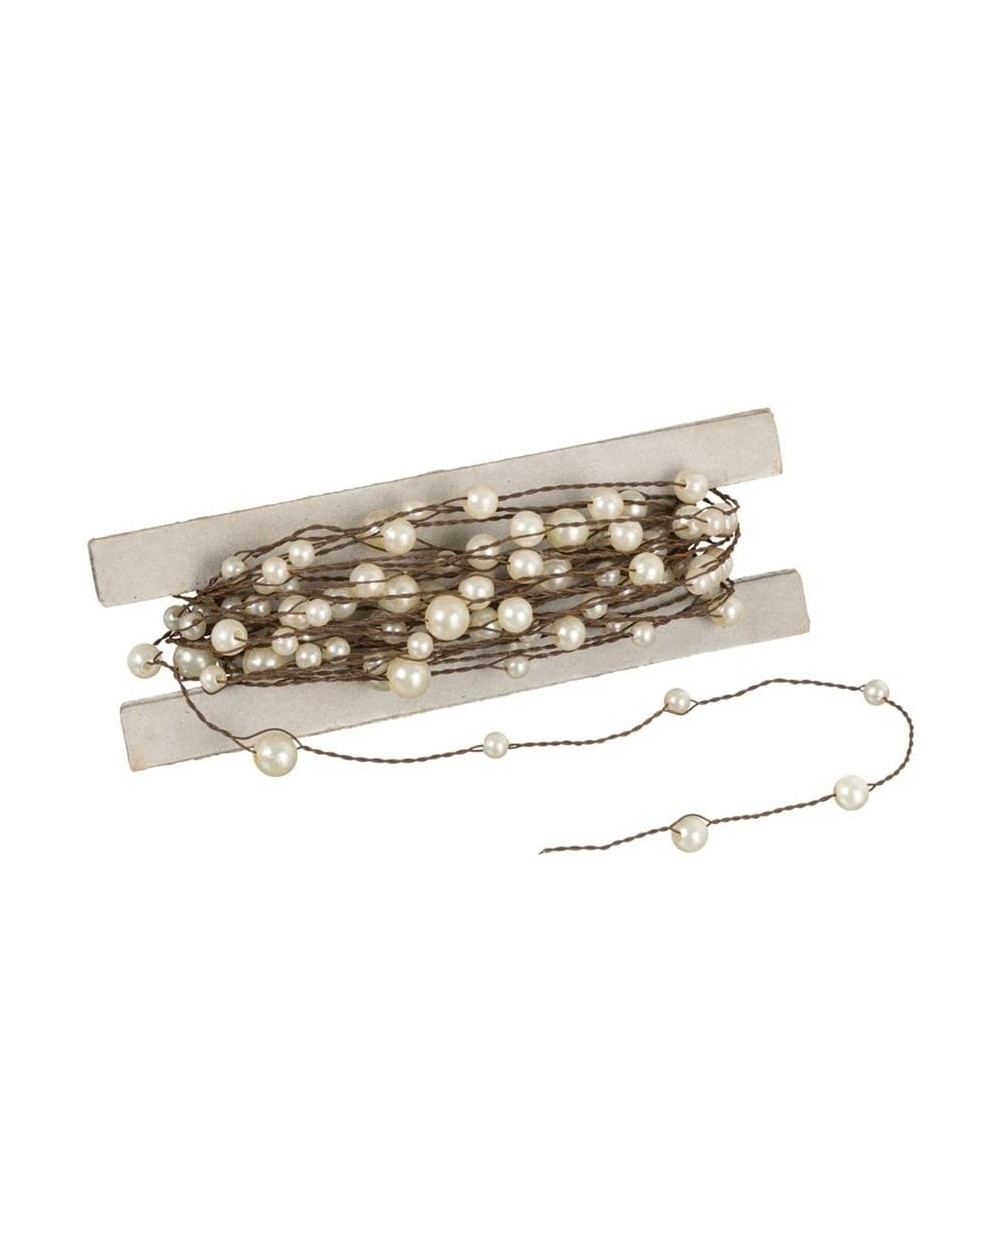 Garlands 24' Strand of Rustic Beaded Wire Garland (White (Simulated Pearl)) - C811BV8N9HX $13.09